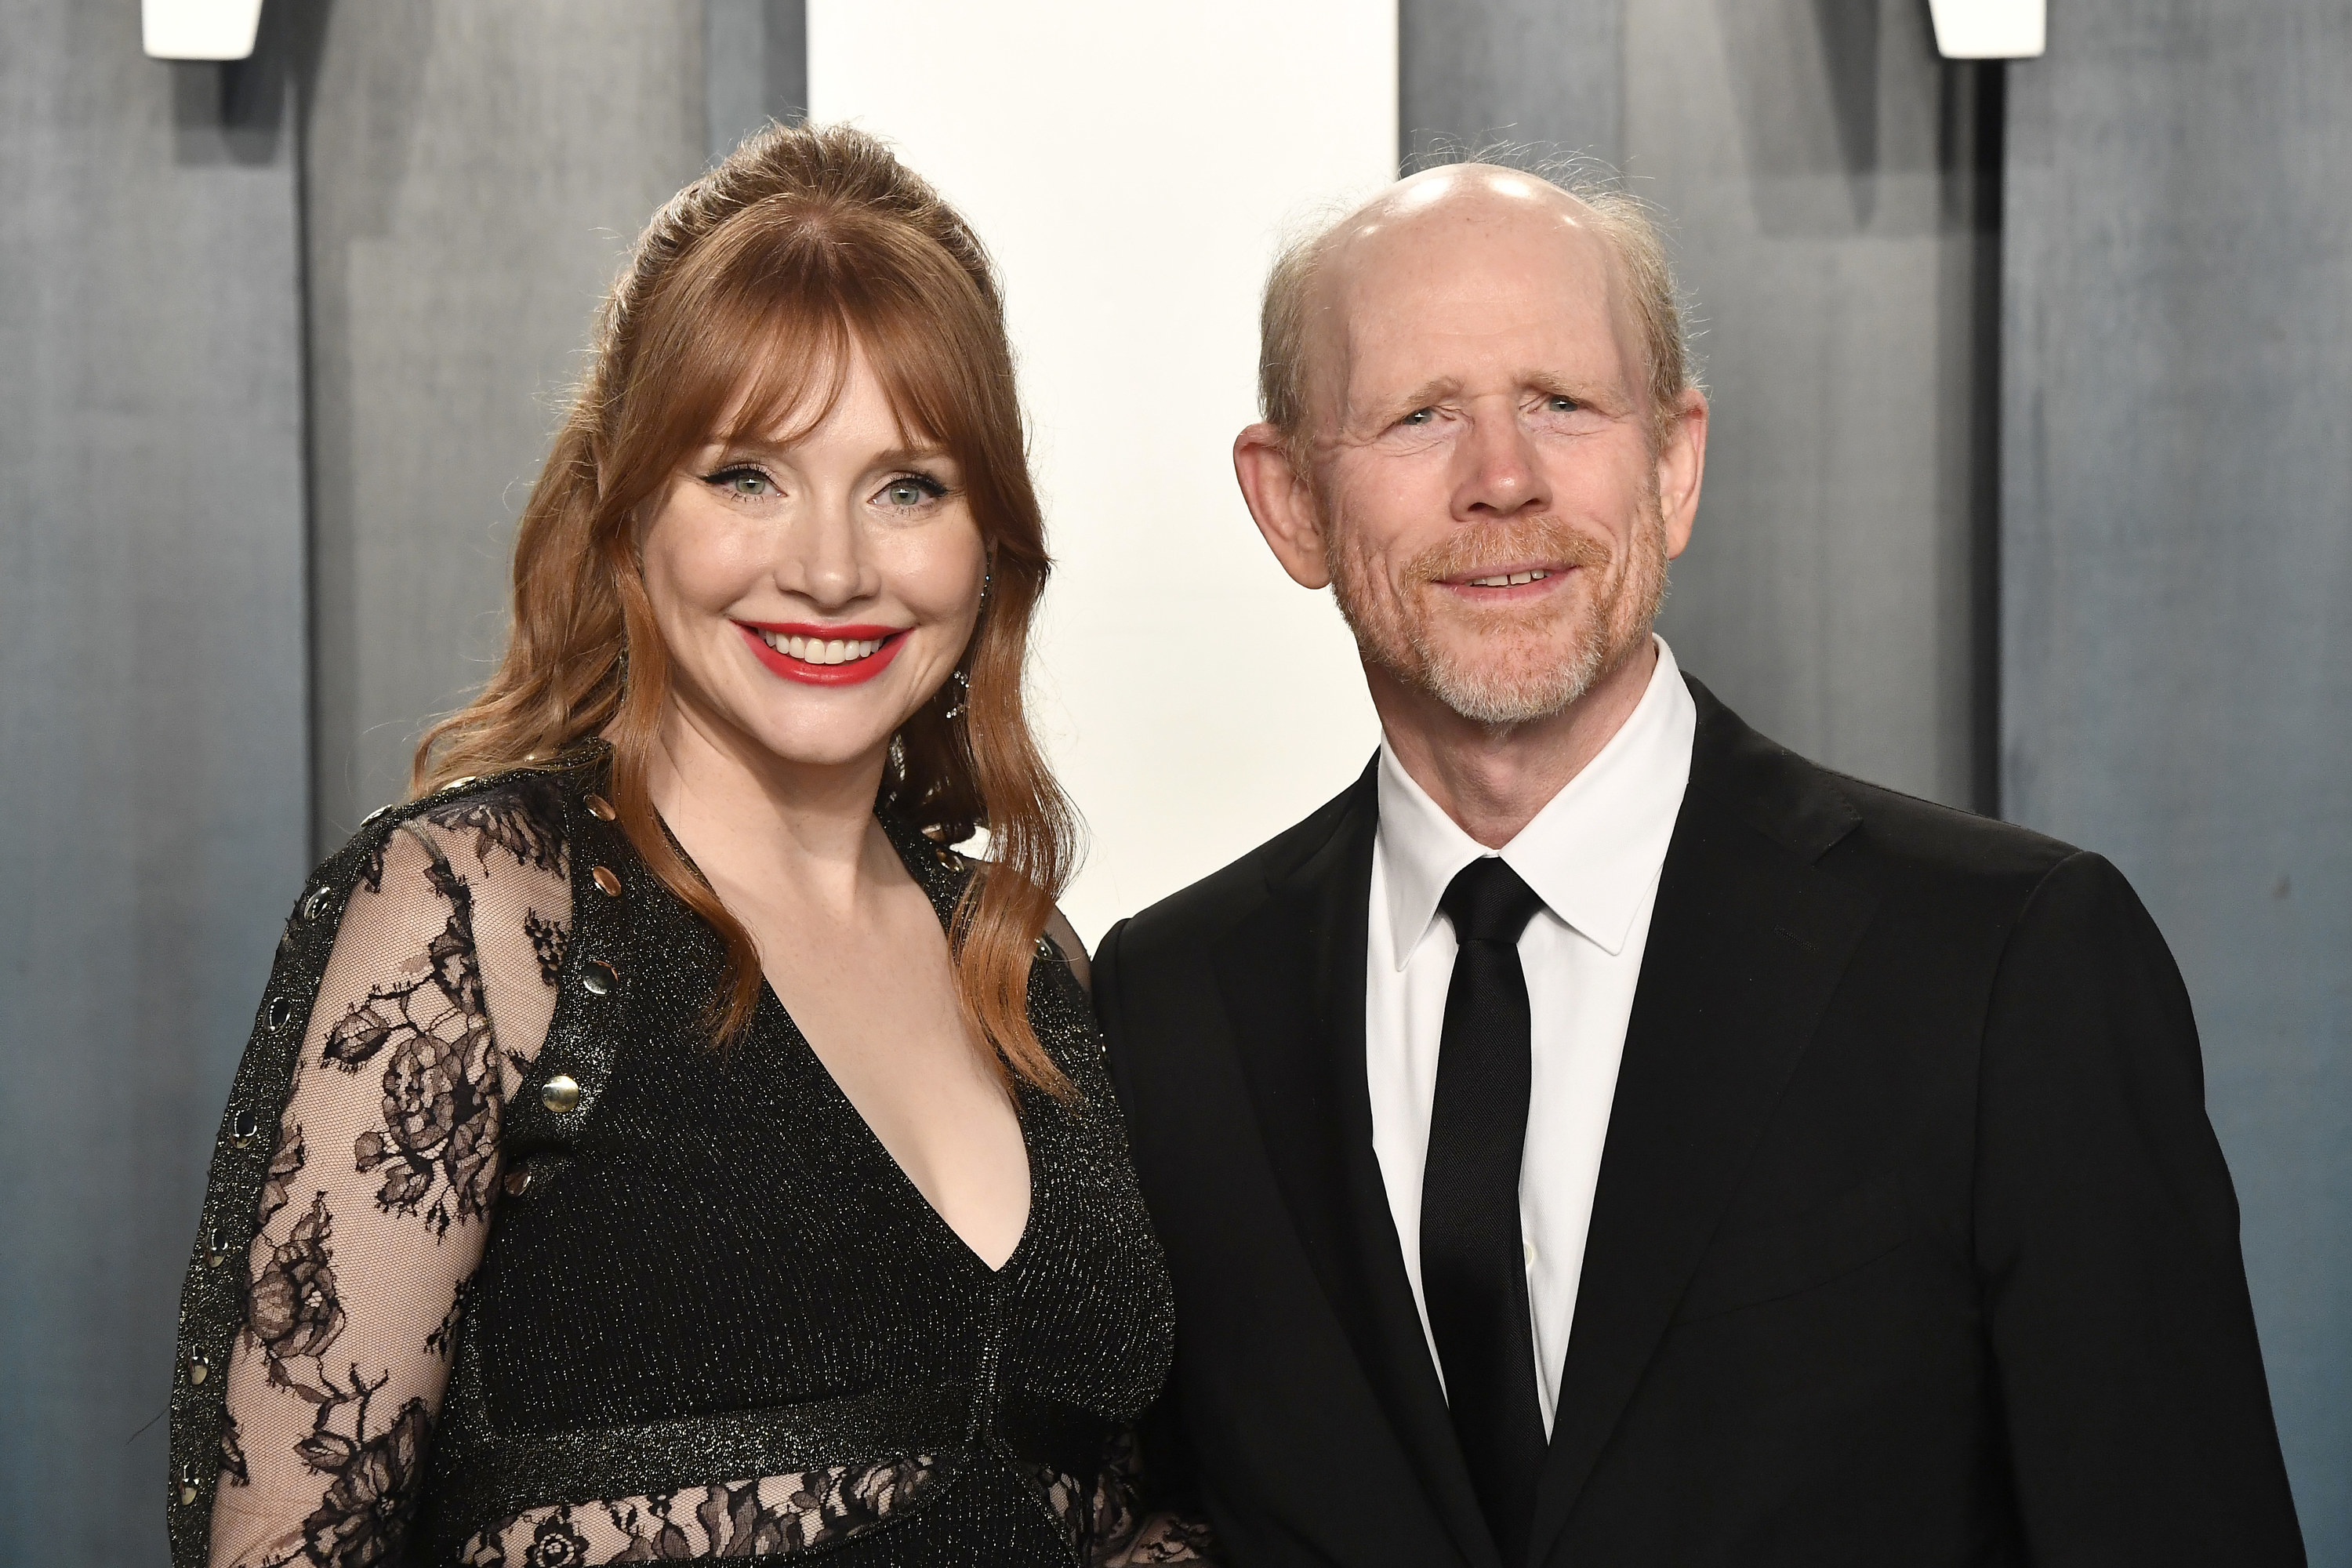 Bryce Dallas Howard and Ron Howard on the red carpet